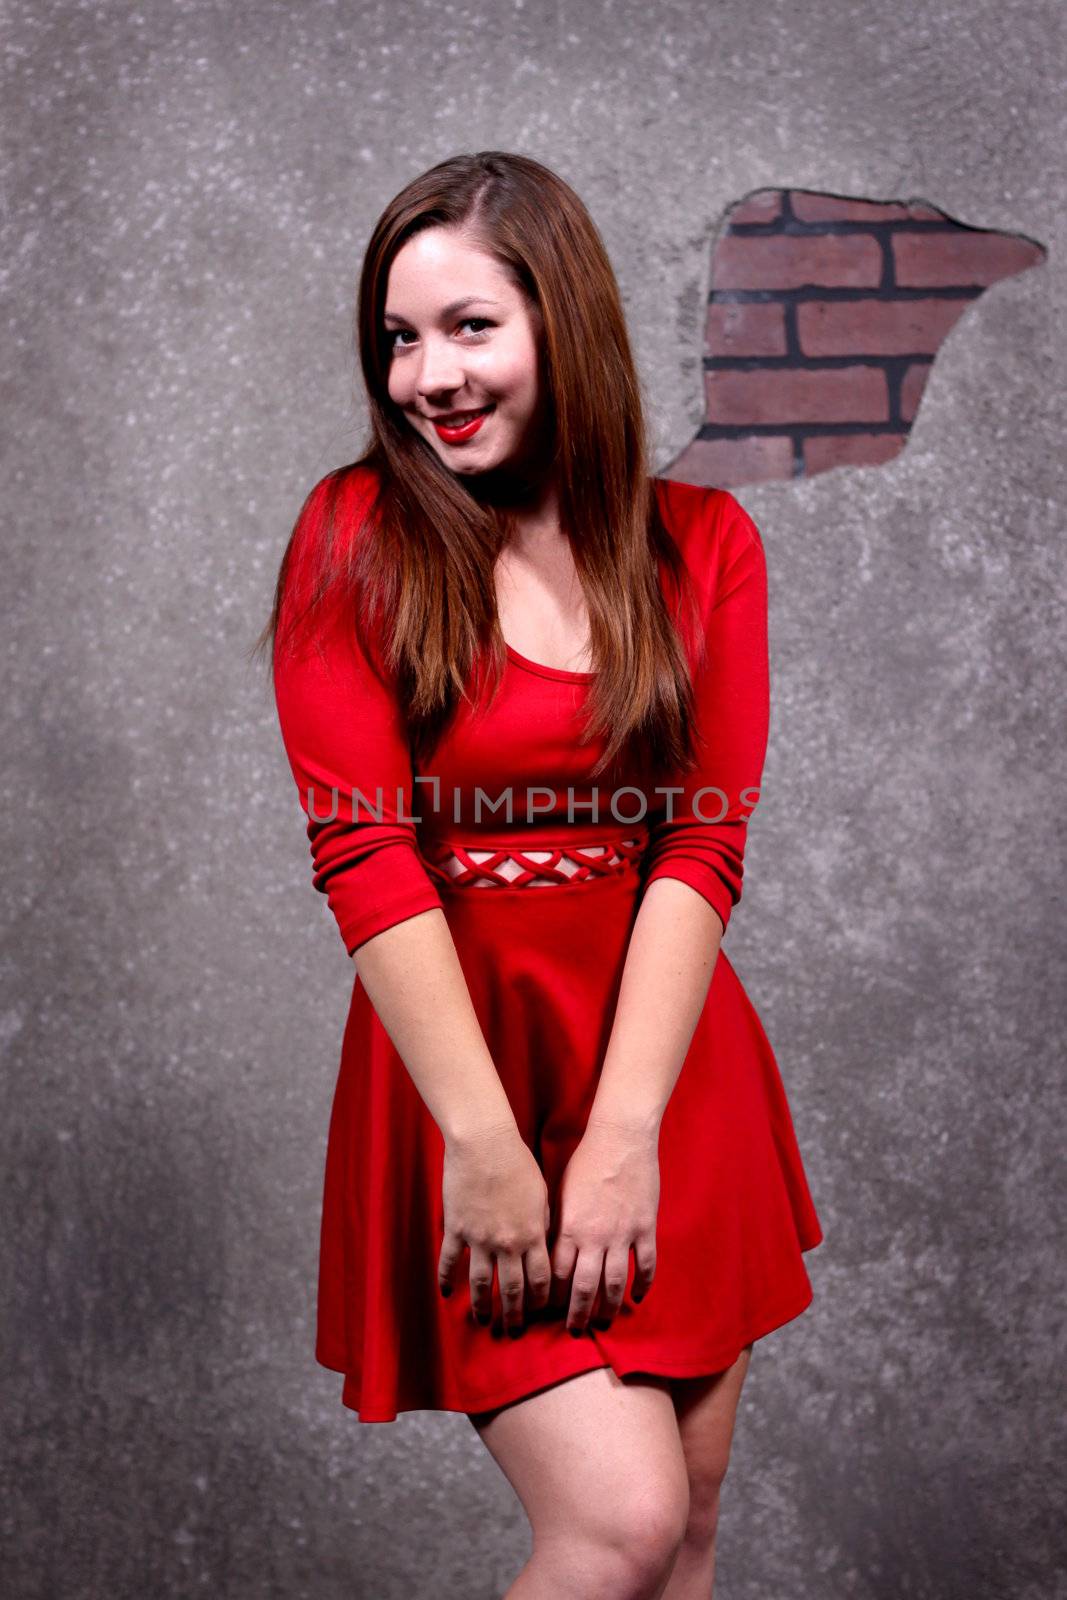 Woman in a red dress in front of a concrete wall.